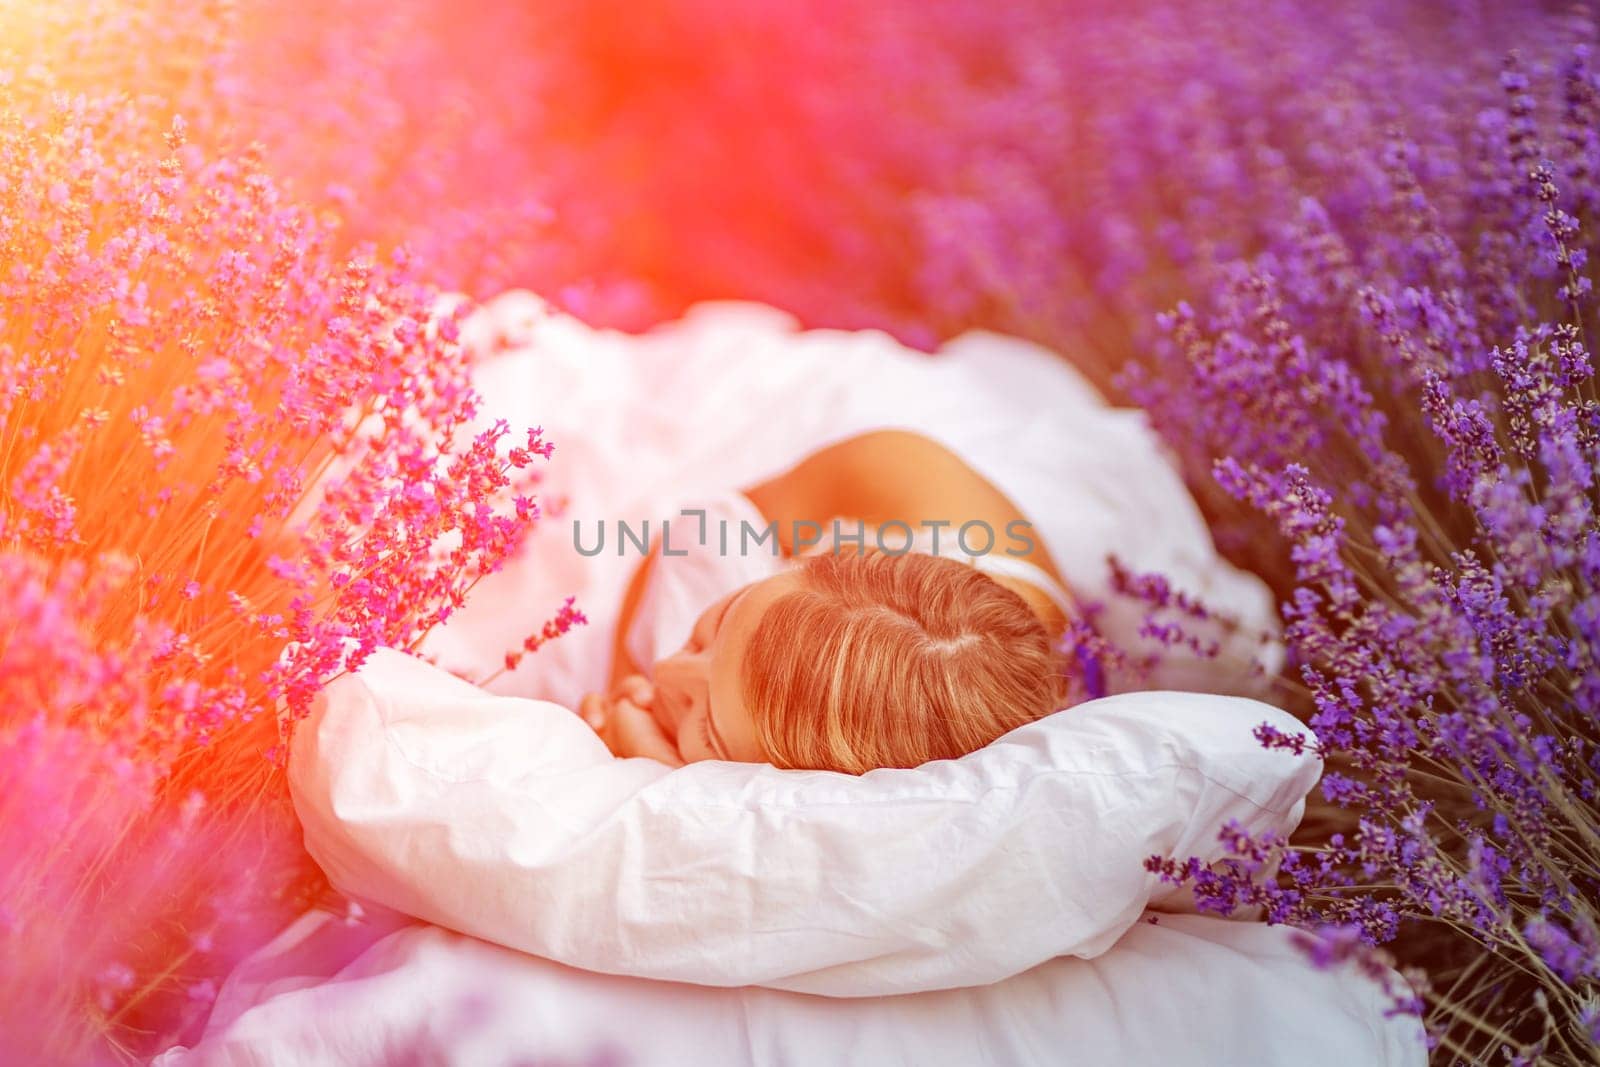 Woman lavender field. A middle-aged woman lies in a lavender field and enjoys aromatherapy. Aromatherapy concept, lavender oil, photo session in lavender.